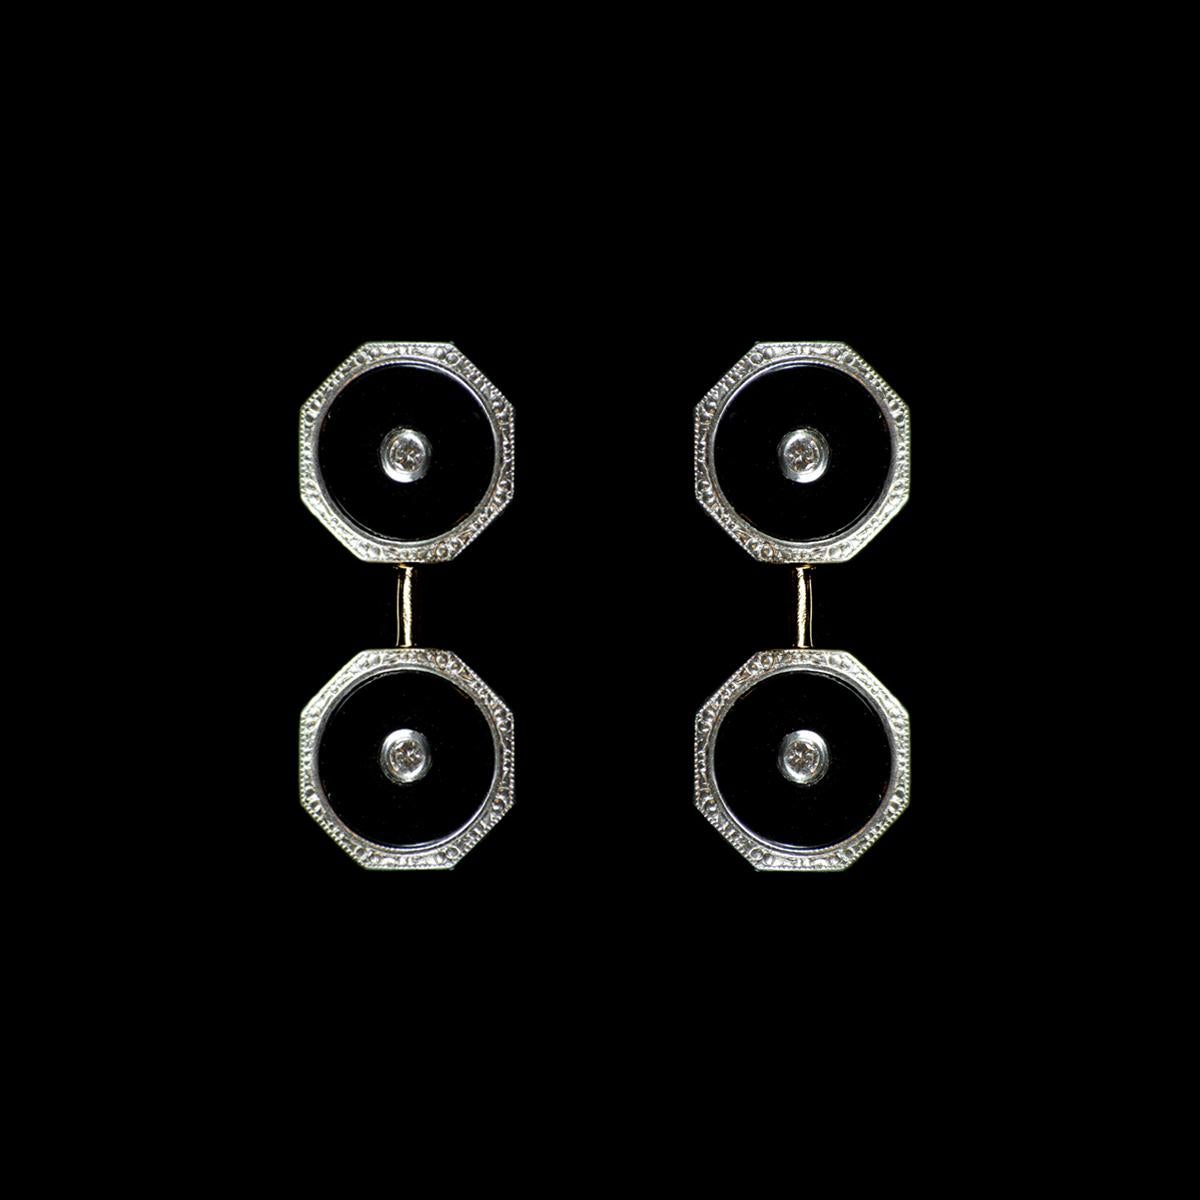 Brilliant Cut 1930s 18 Kt White Gold Antique Cufflinks with Onyx and Diamonds For Sale